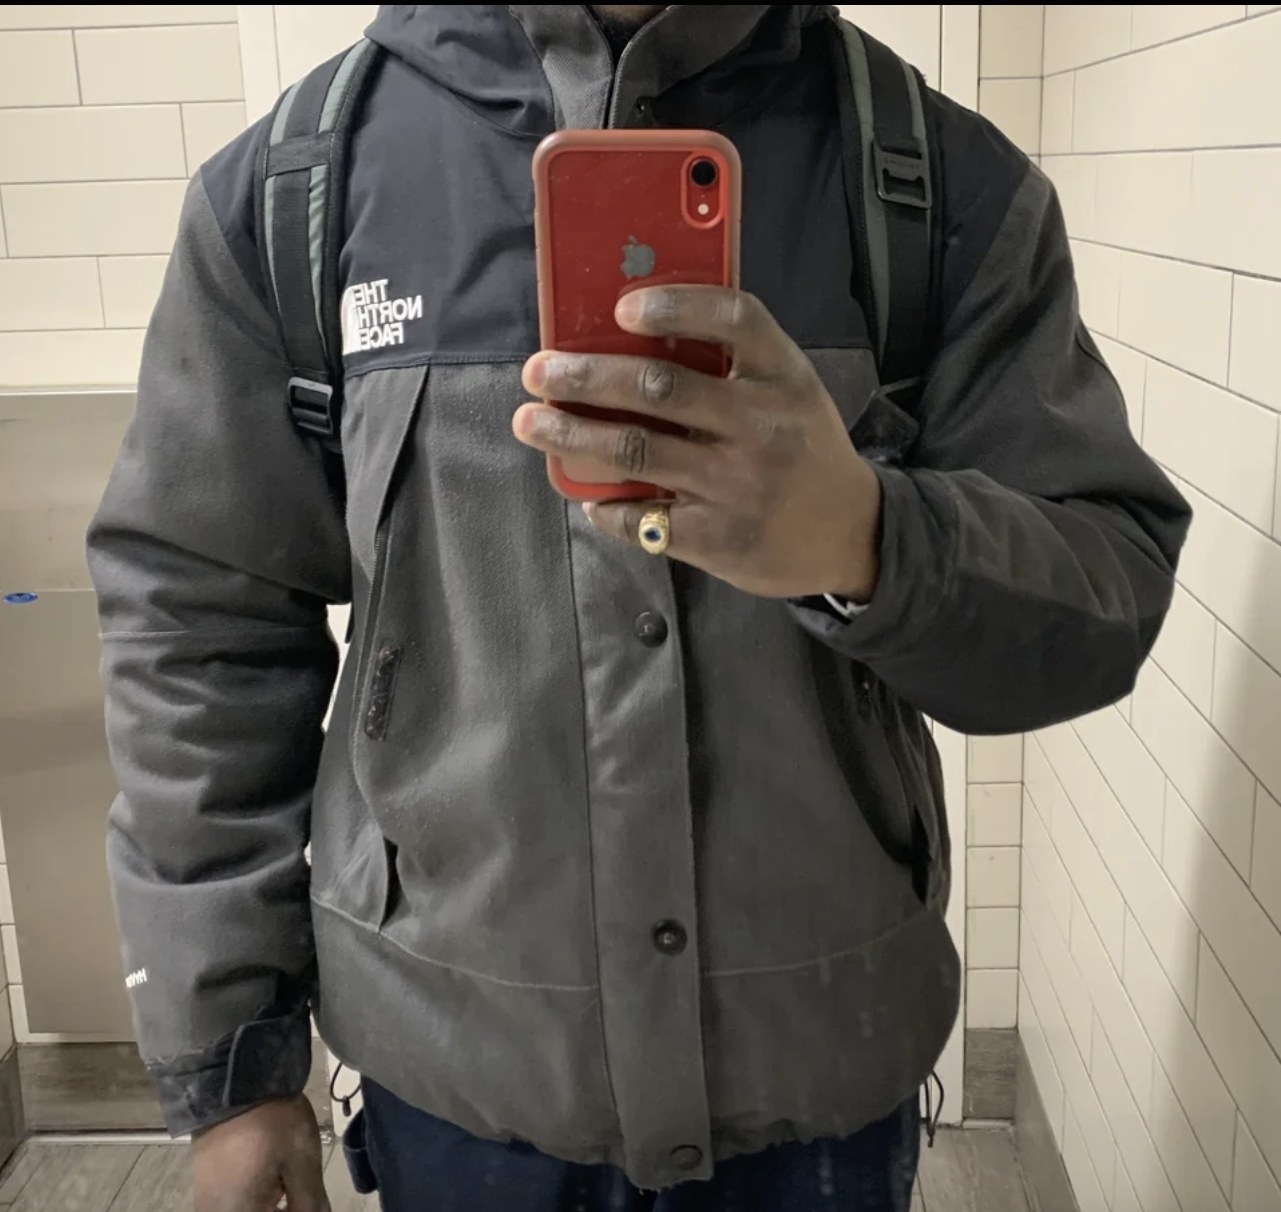 man in a gray North Face jacket takes selfie in mirror